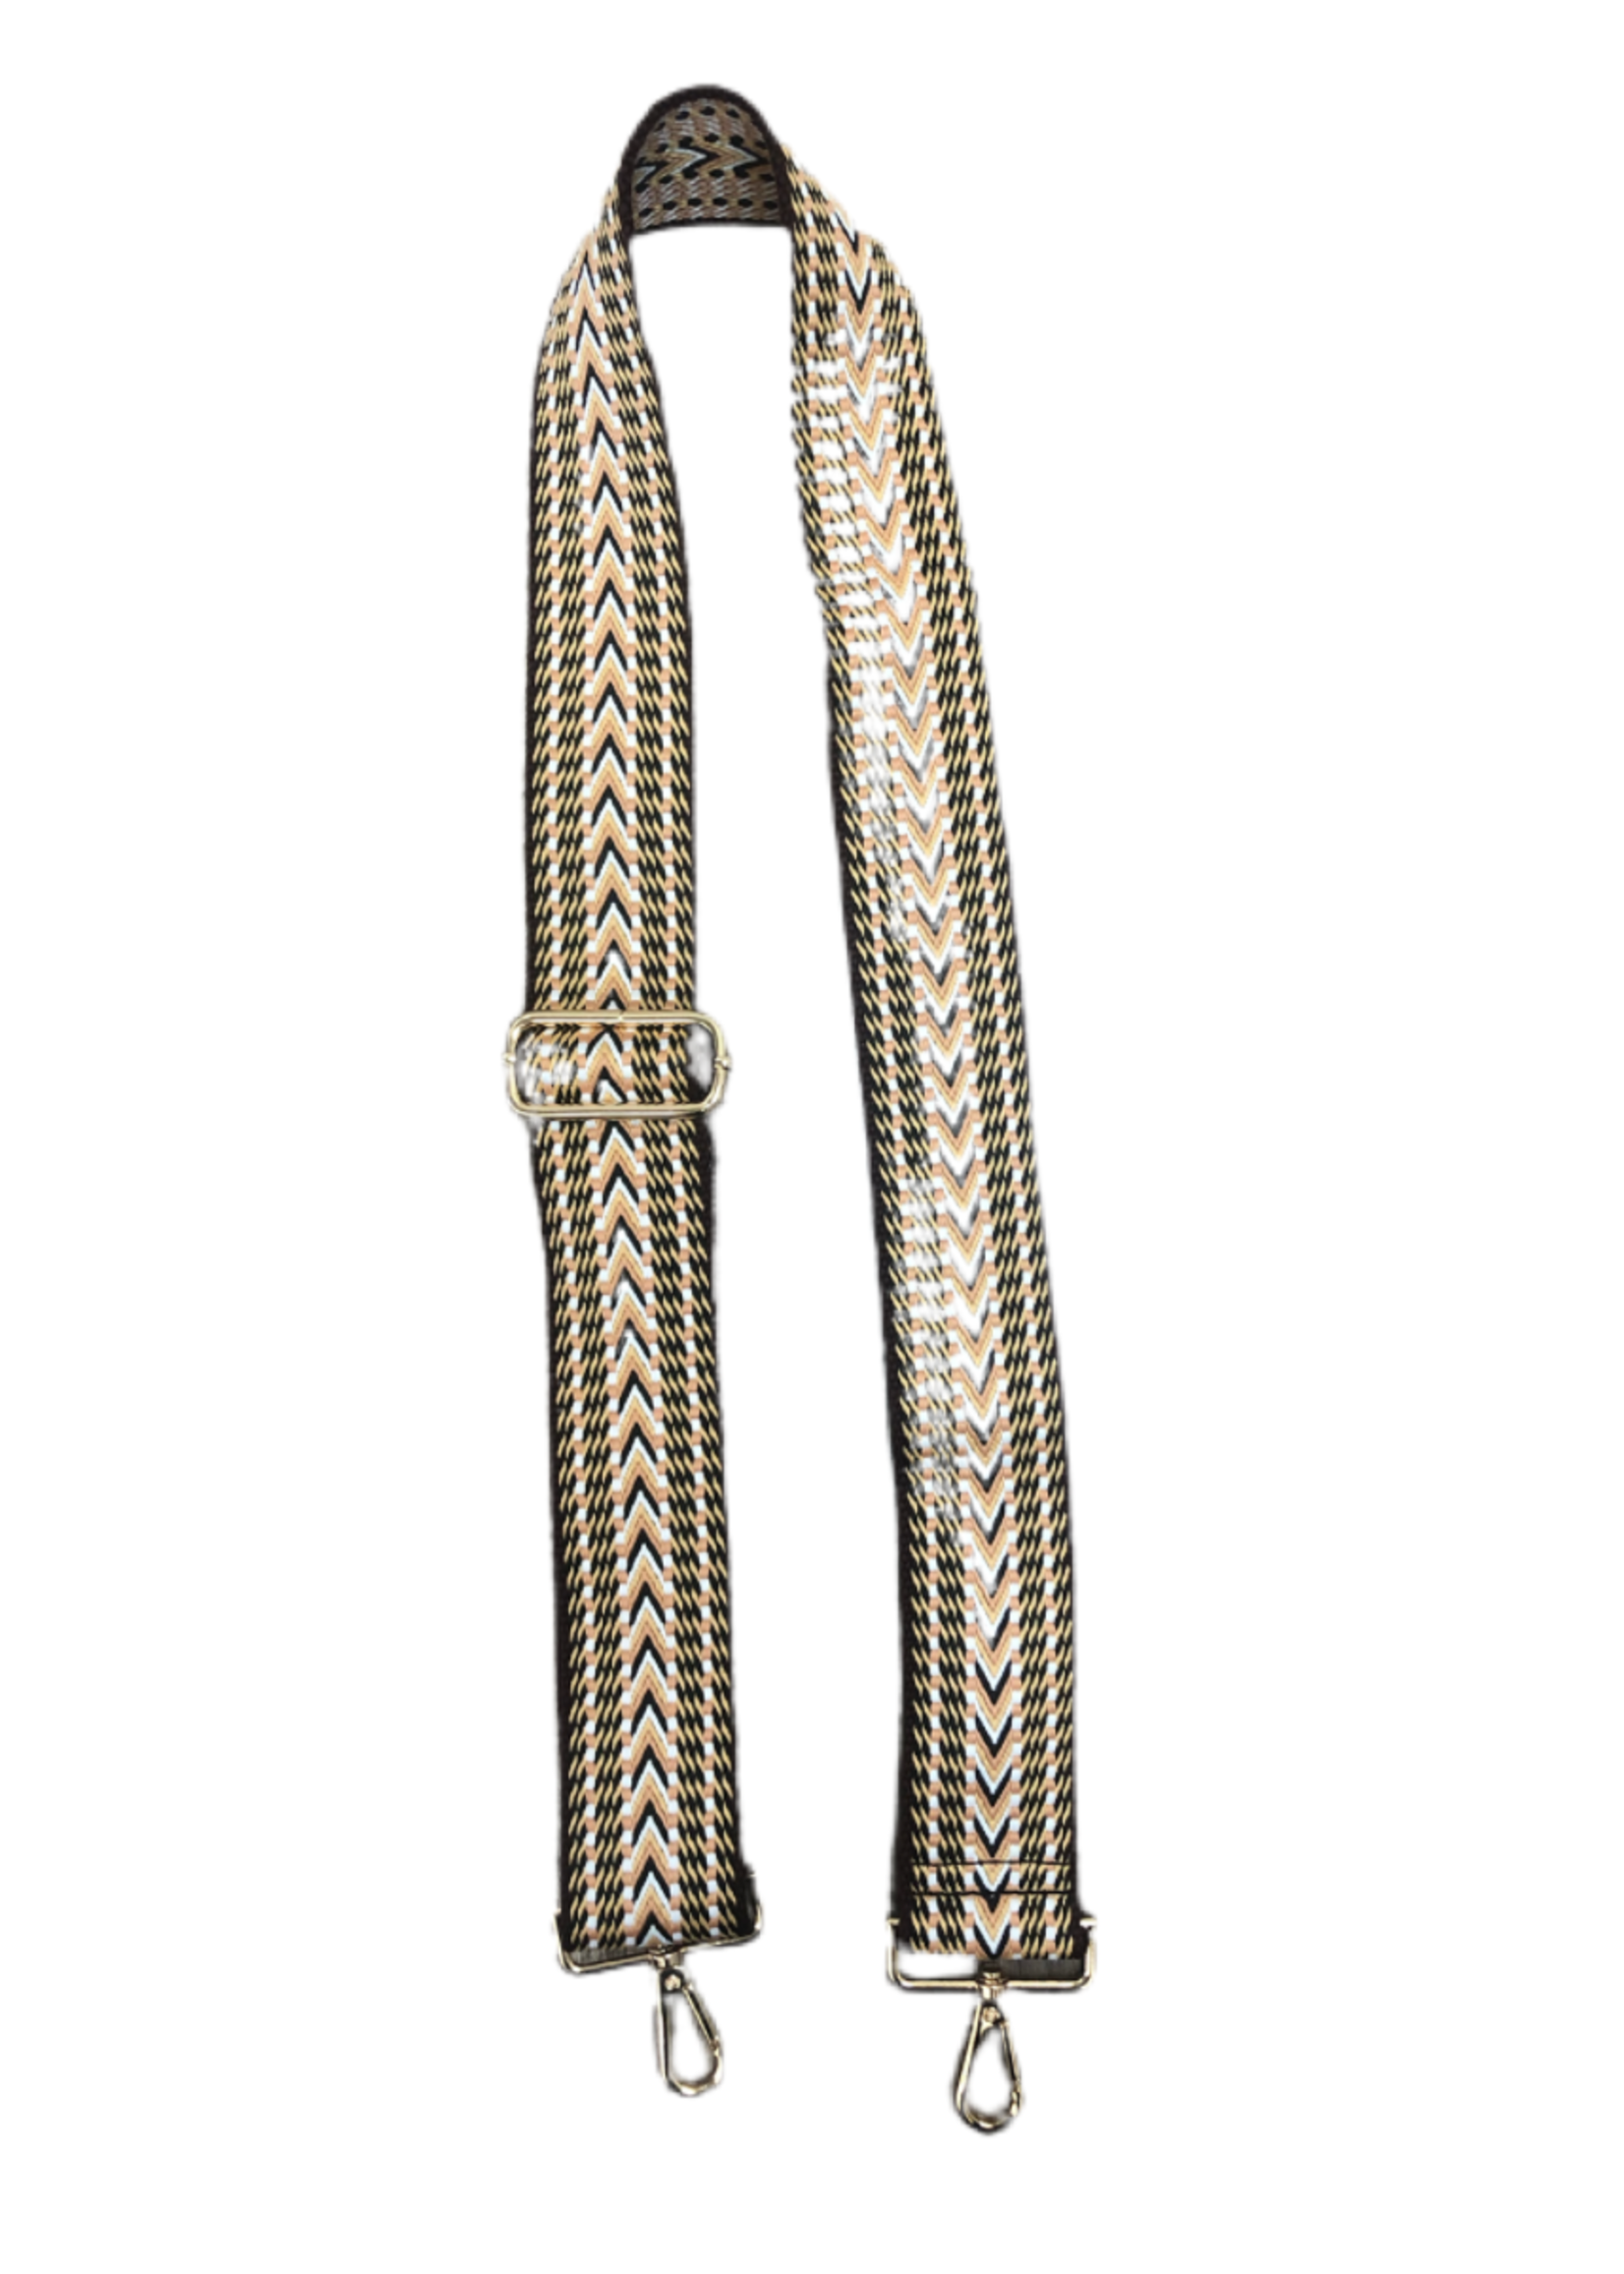 Ahdorned Embroidered Woven Bag Strap - Gold Hardware